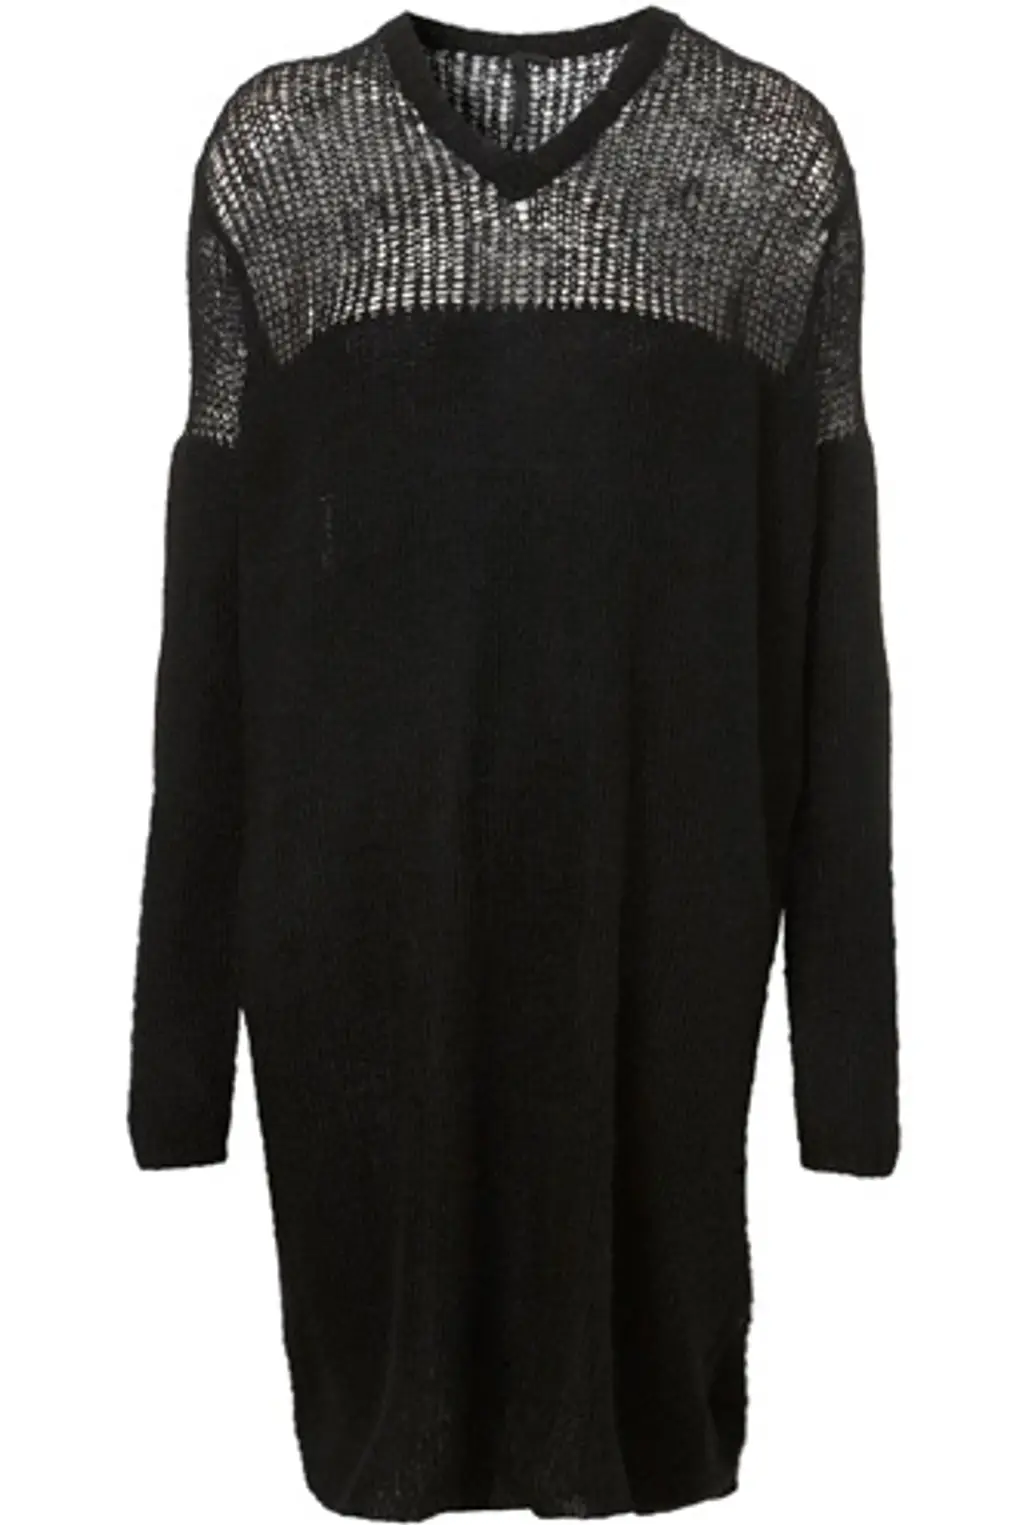 Graduated Mohair Oversized Jumper by Boutique